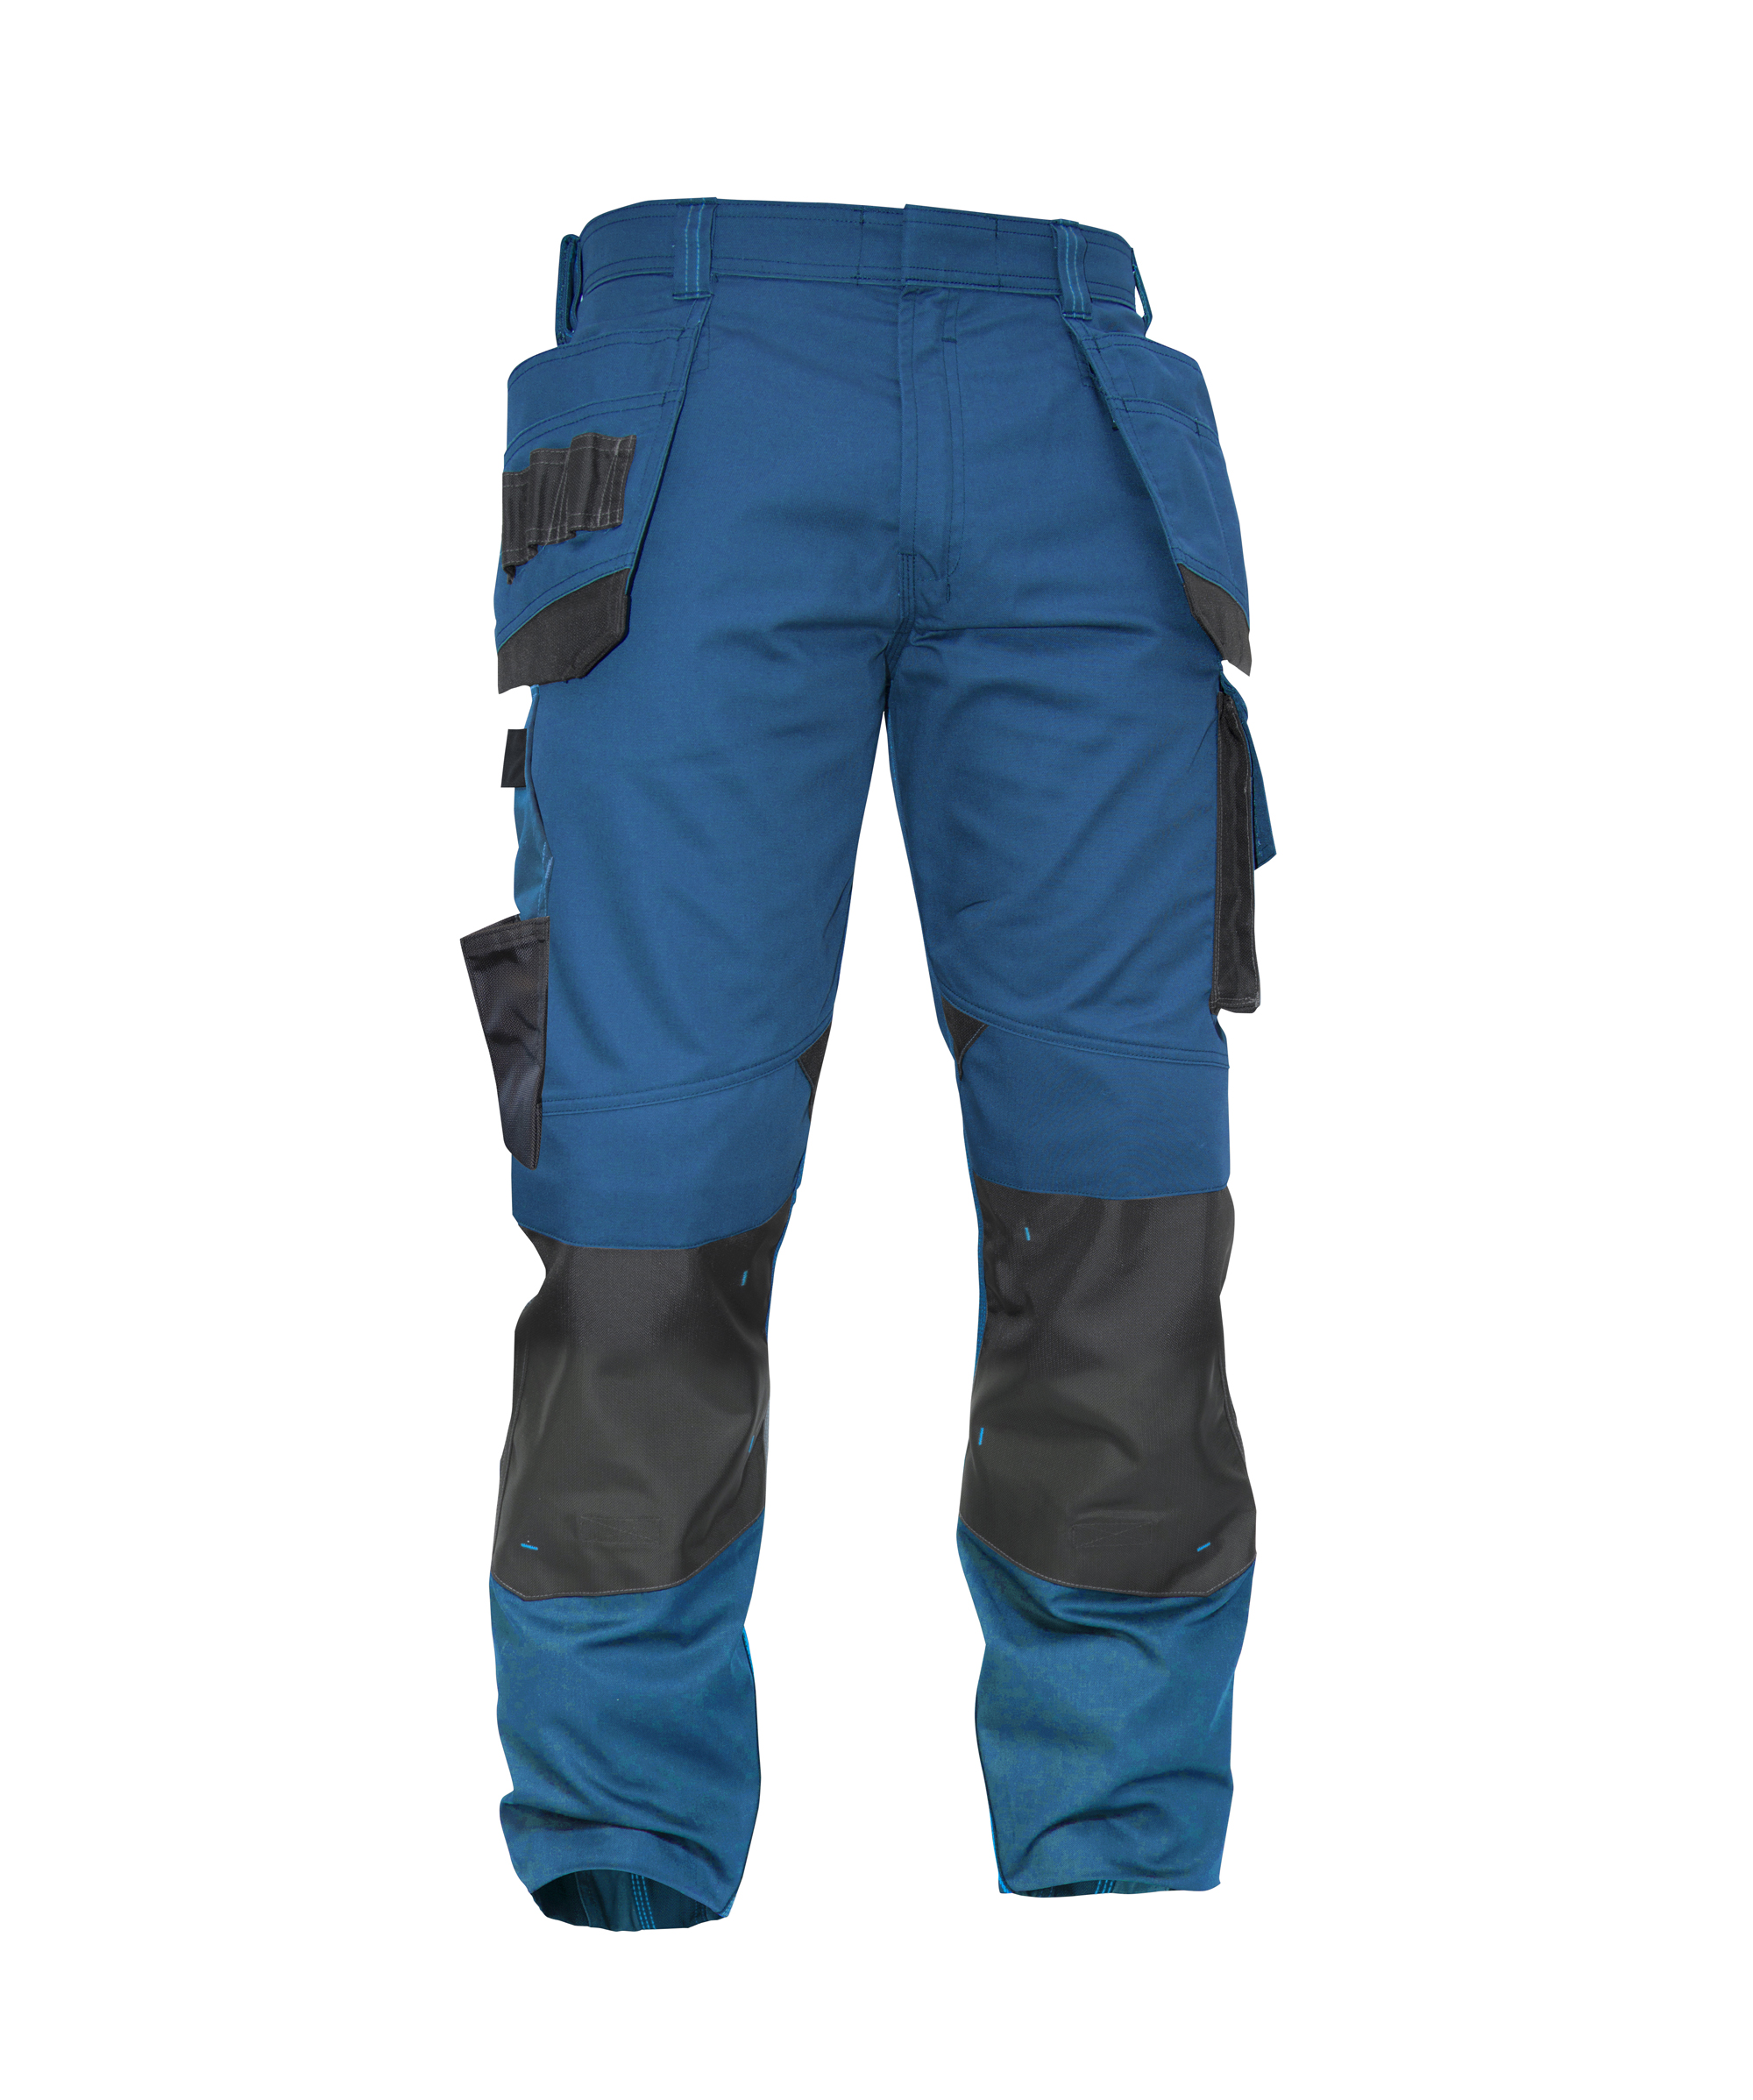 magnetic_two-tone-work-trousers-with-multi-pockets-and-knee-pockets_azure-blue-anthracite-grey_front.jpg